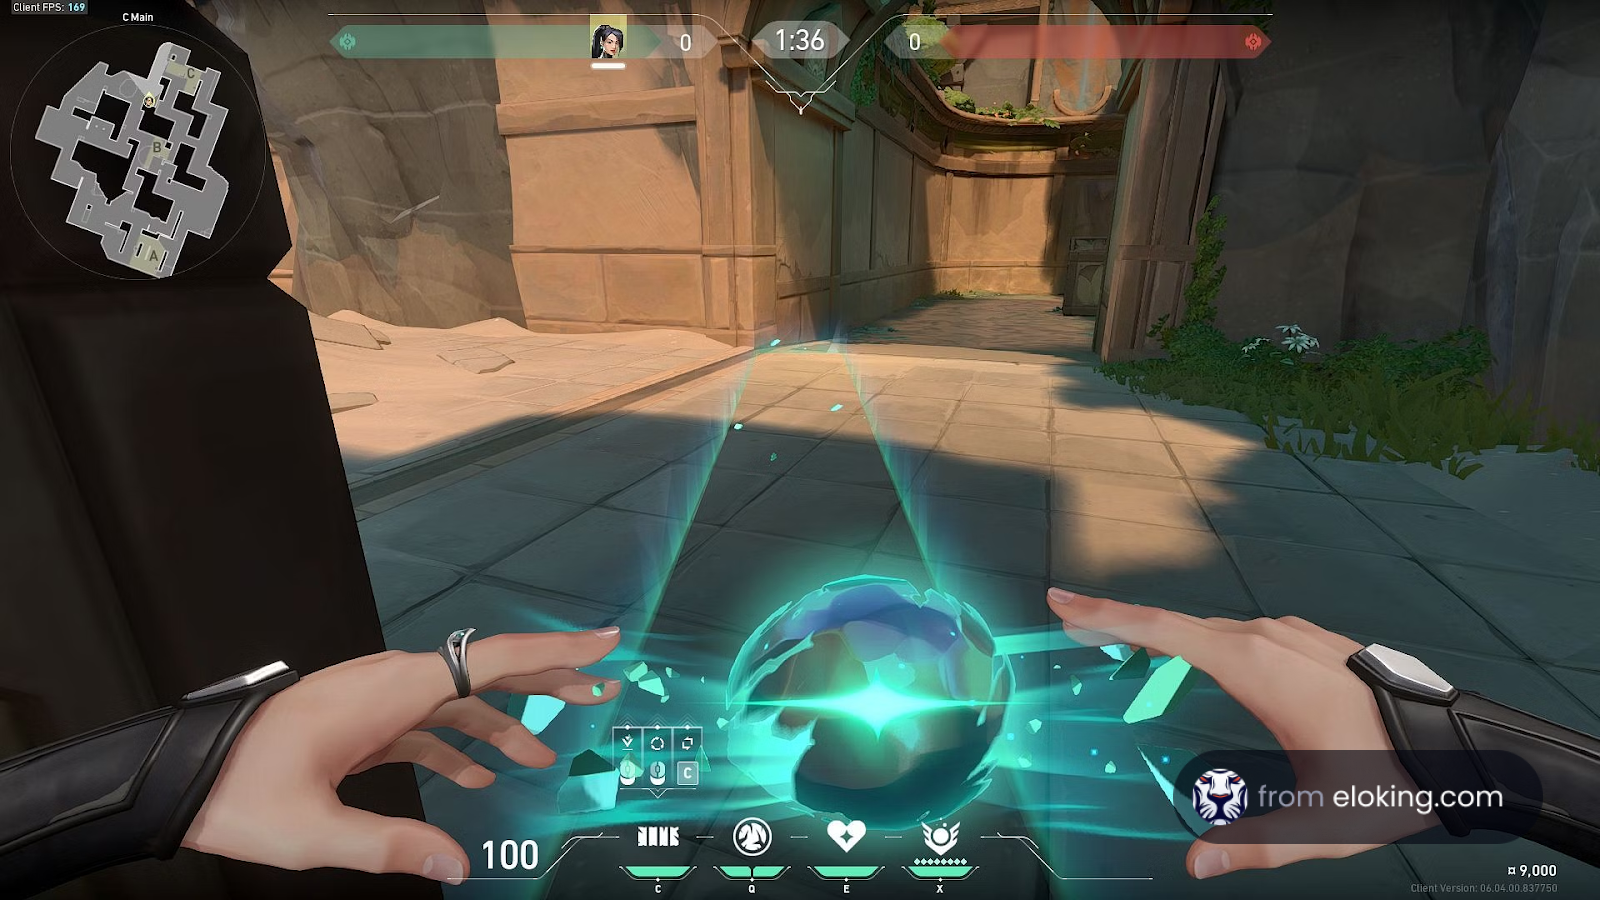 First-person view in a shooter game, activating a glowing power orb